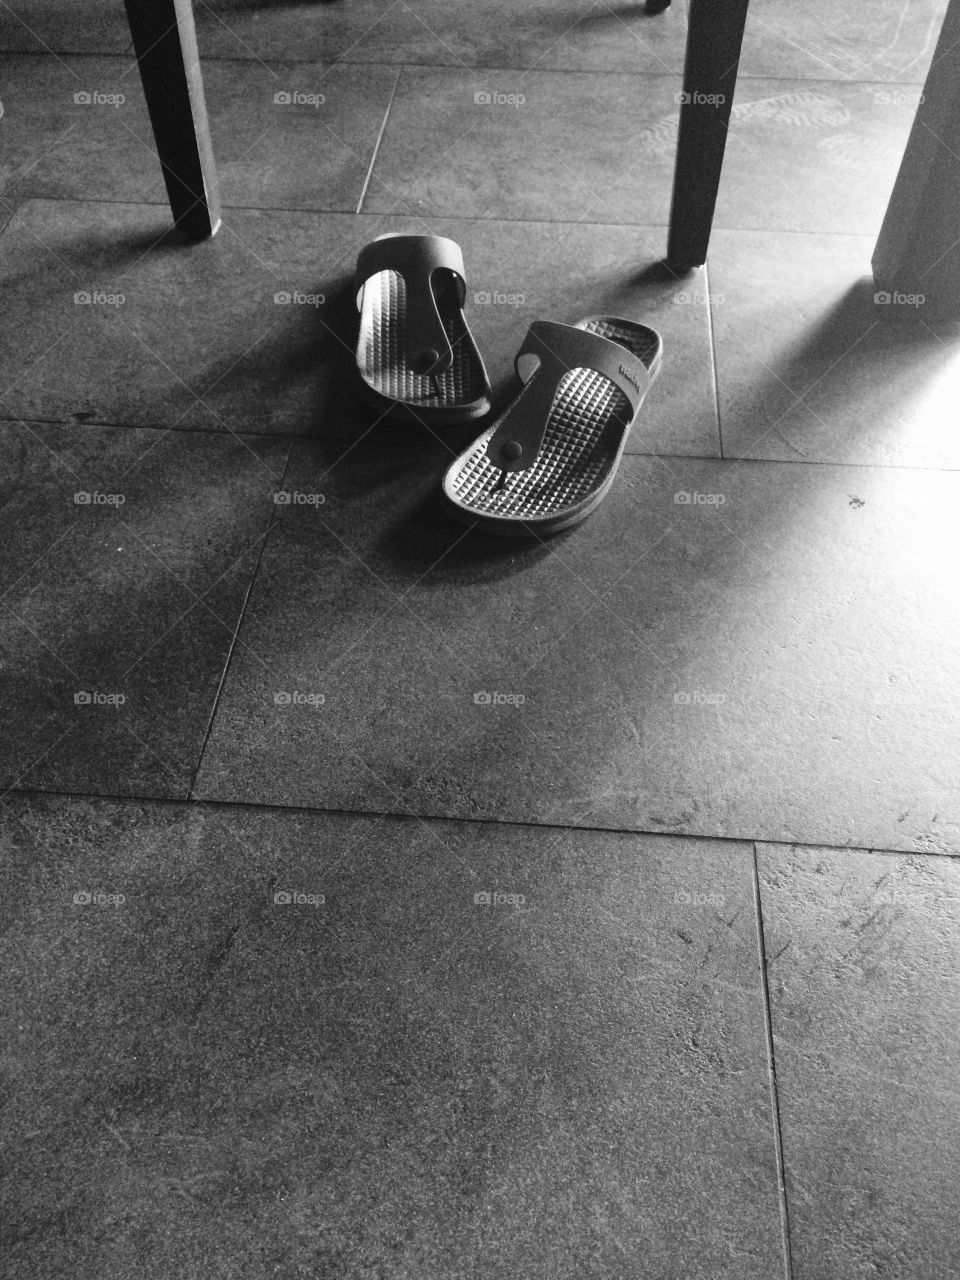 Shoes on the floor